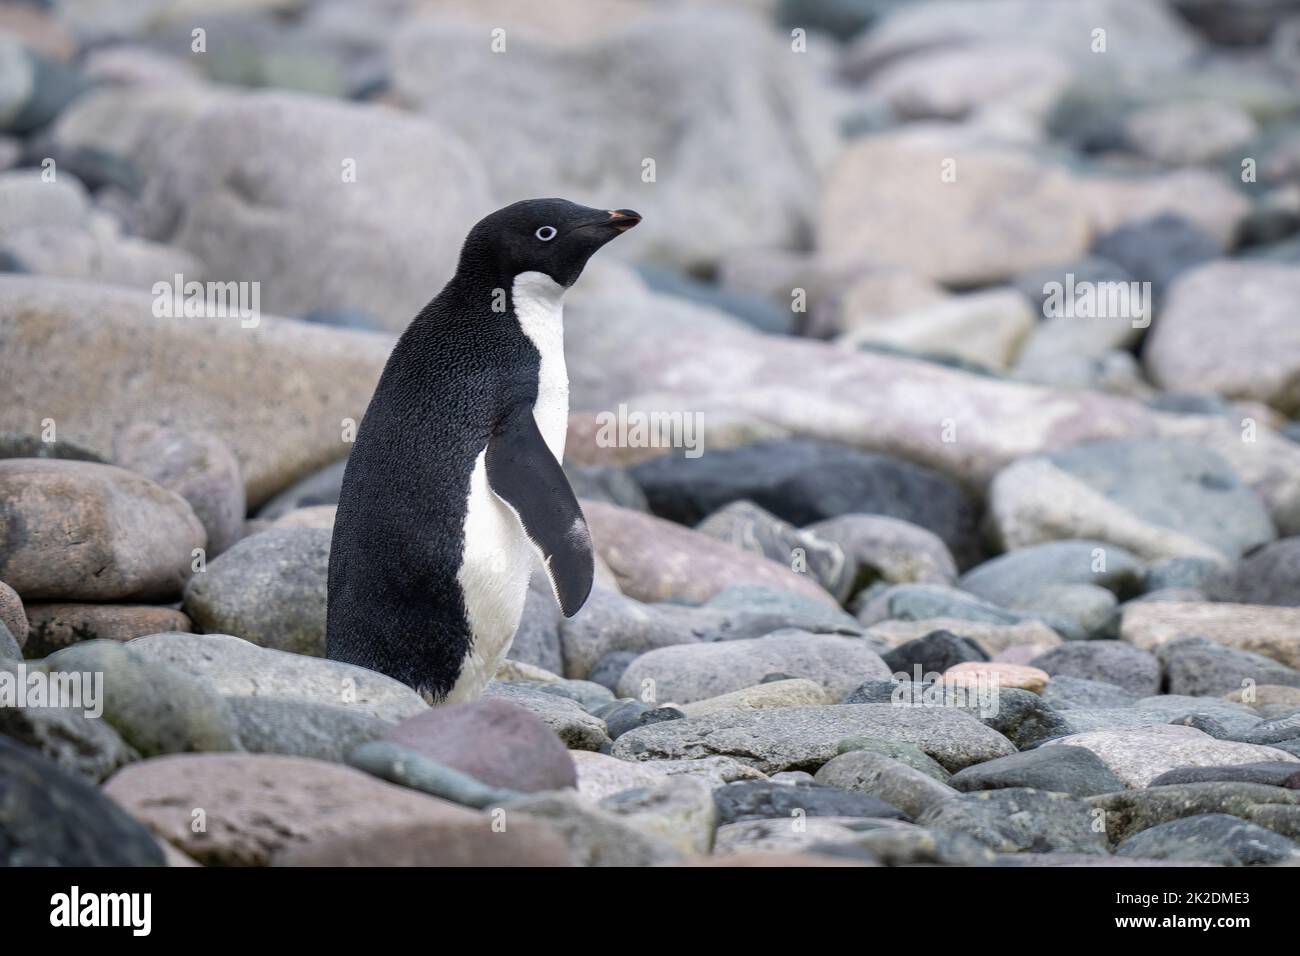 Adelie penguin stands on rocks in profile Stock Photo